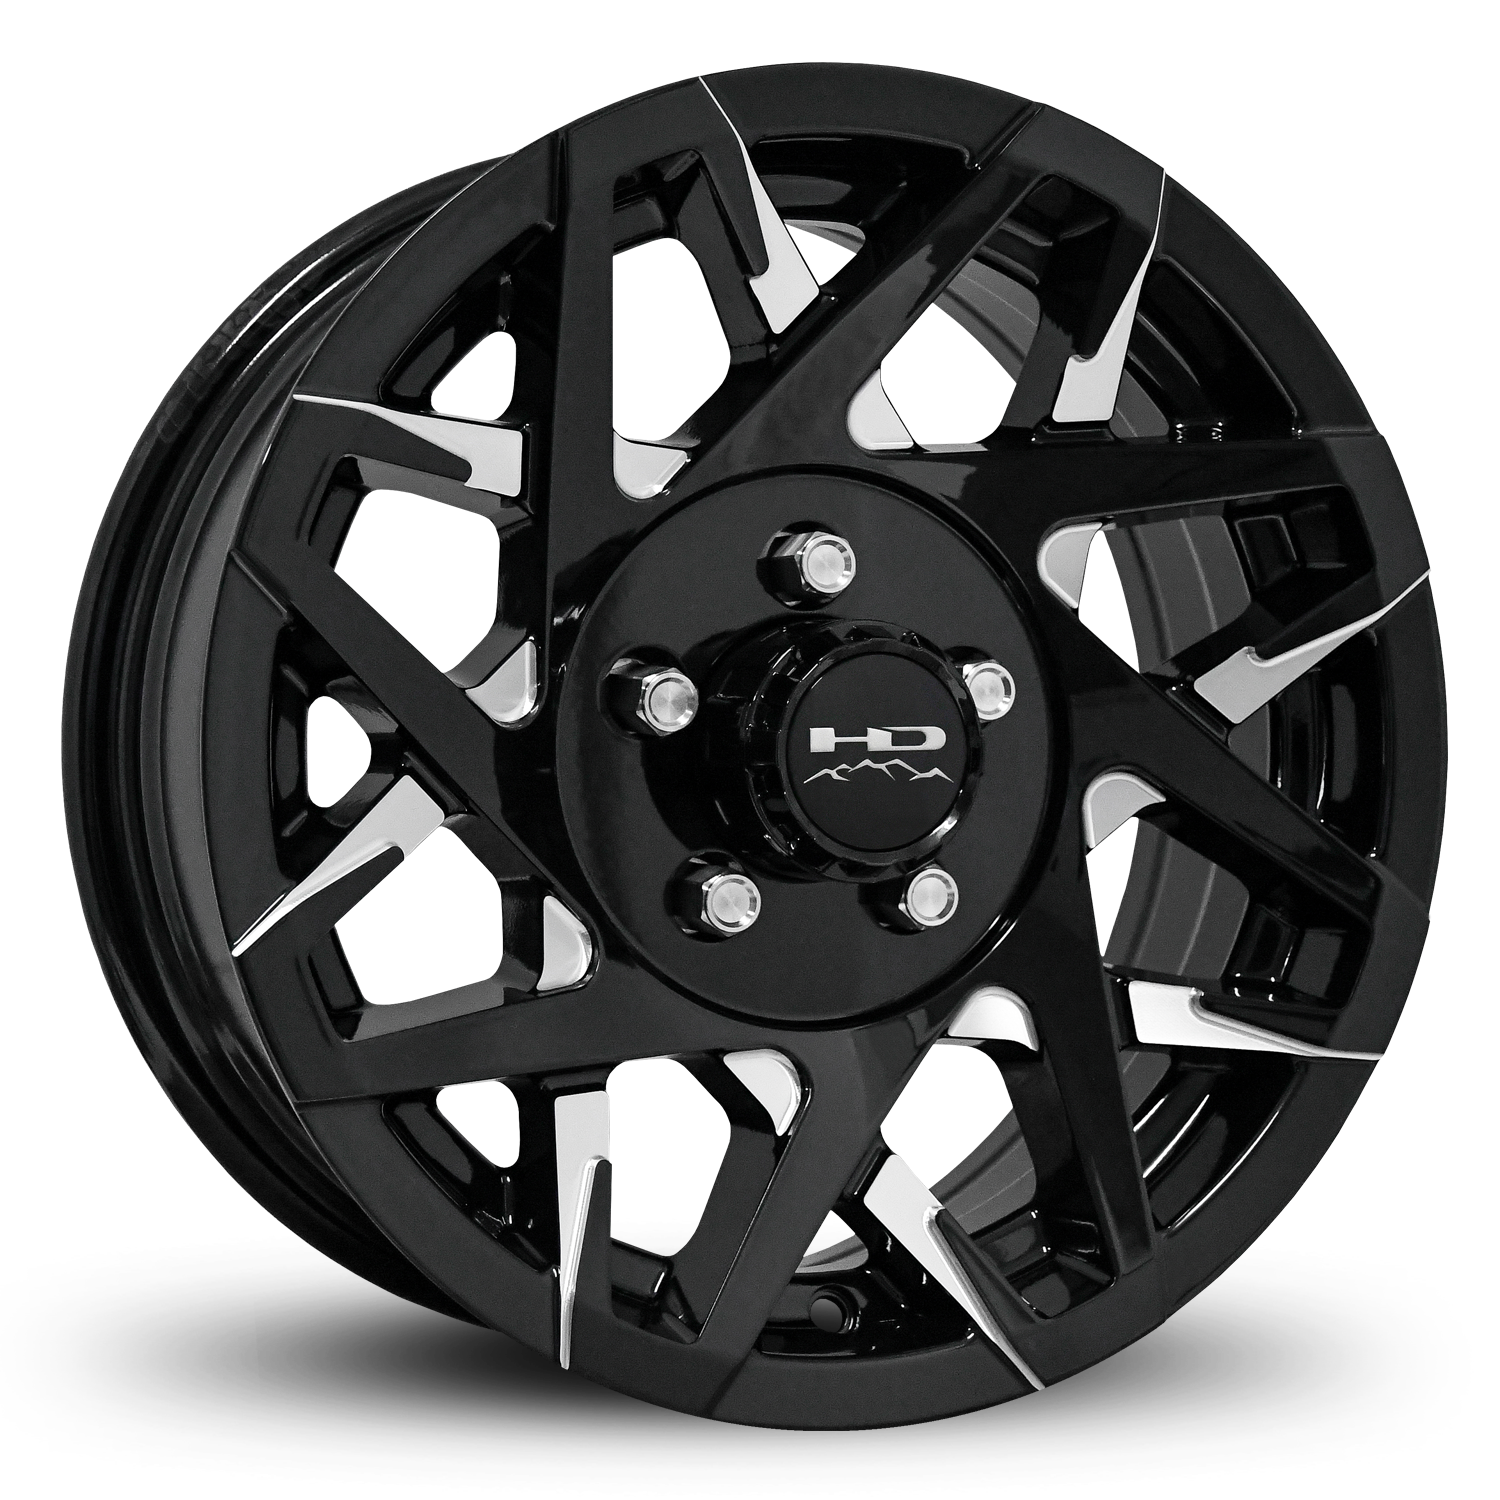 HD Off-Road Canyon Custom Trailer Wheel Rims in 15x6.0  15x6 Gloss Black CNC Milled Face Spokes with Center Cap & Logo fits 5x4.50 / 5x114.3 Axle Boat, Car, RV, Travel, Concession, Horse, Utility, Lawn & Garden, & Landscaping.